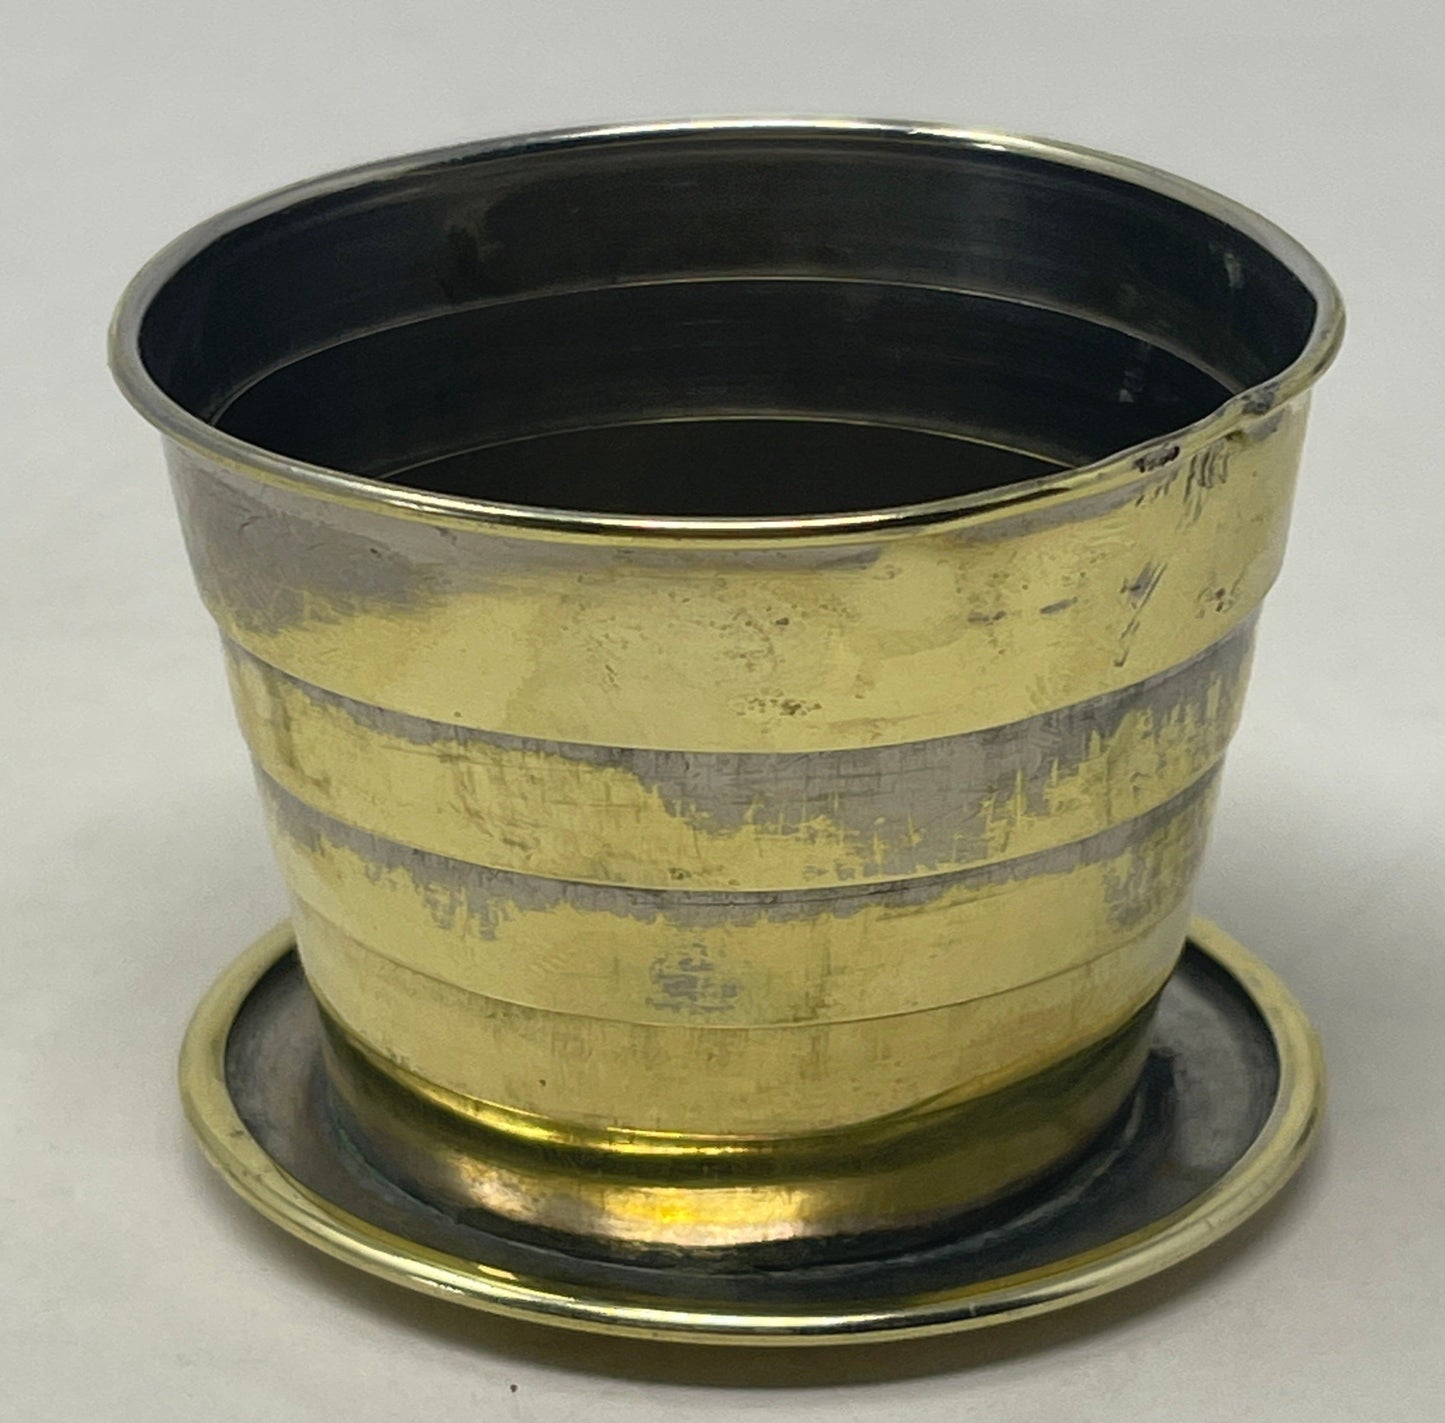 February 23, 1897 Nickel Plated Brass  Cup